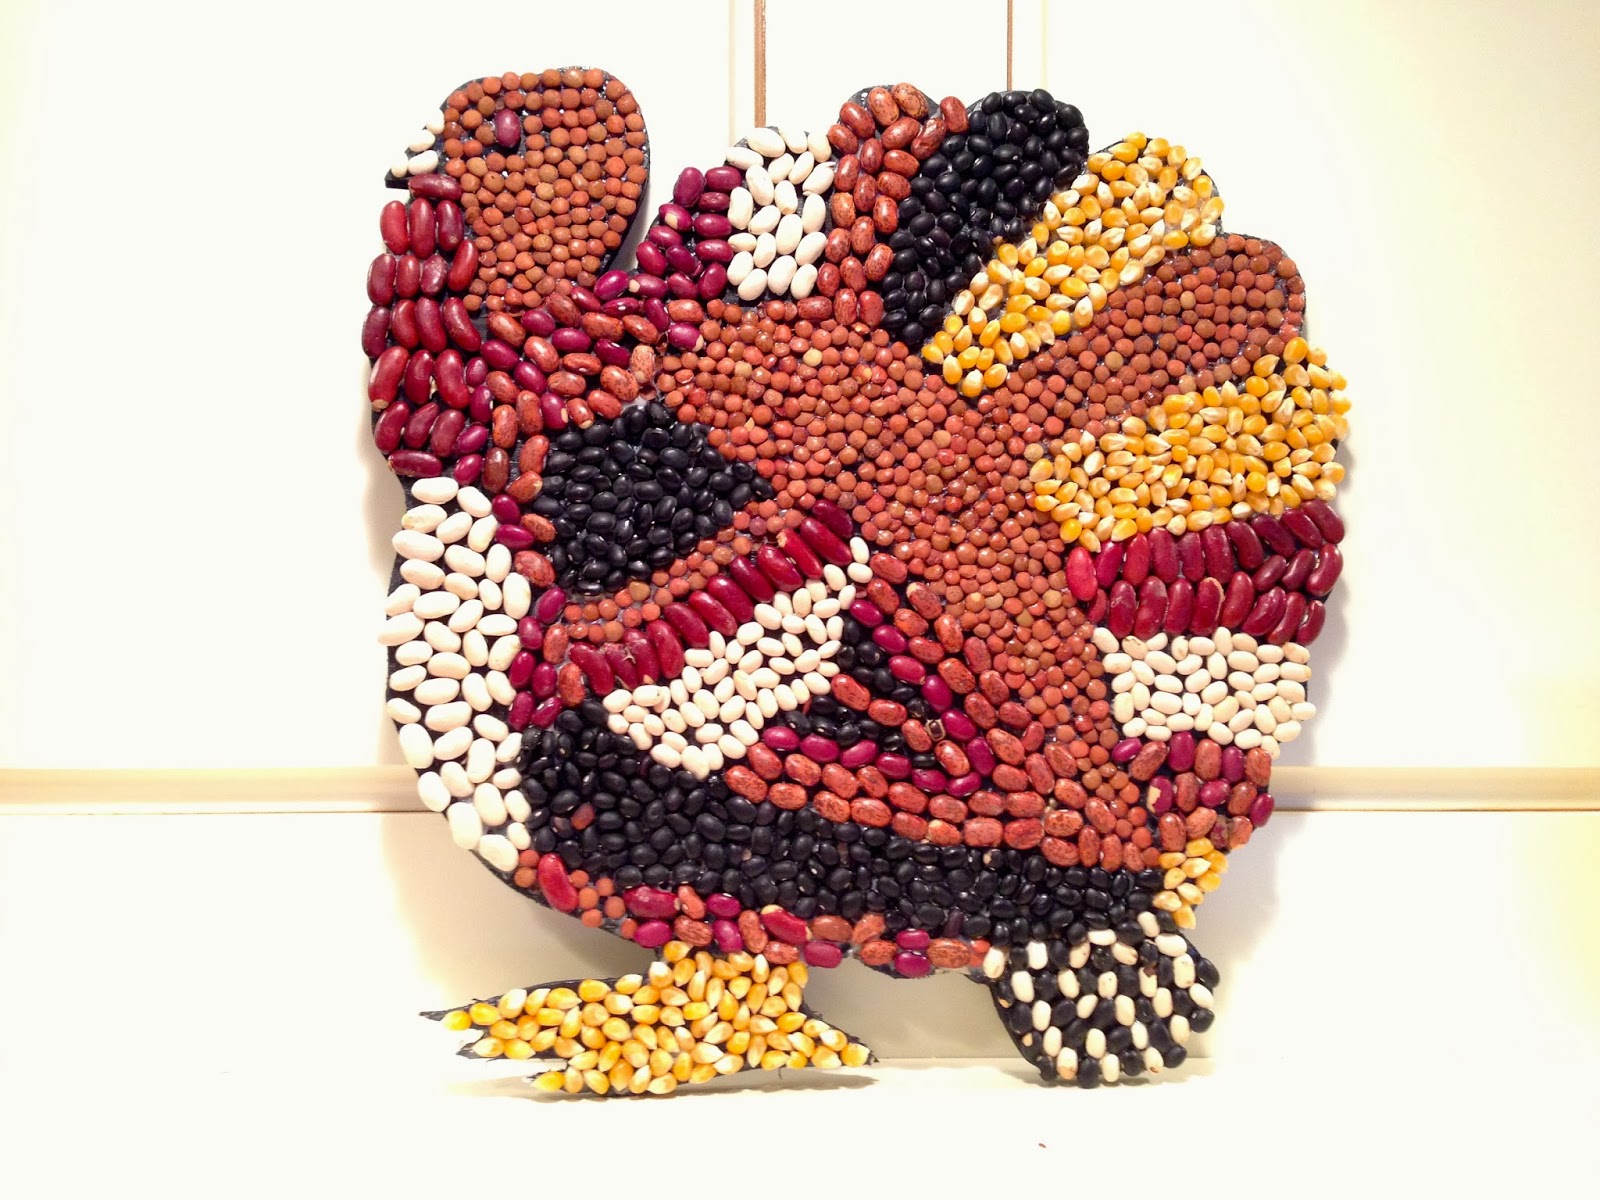 Turkey art made from beans